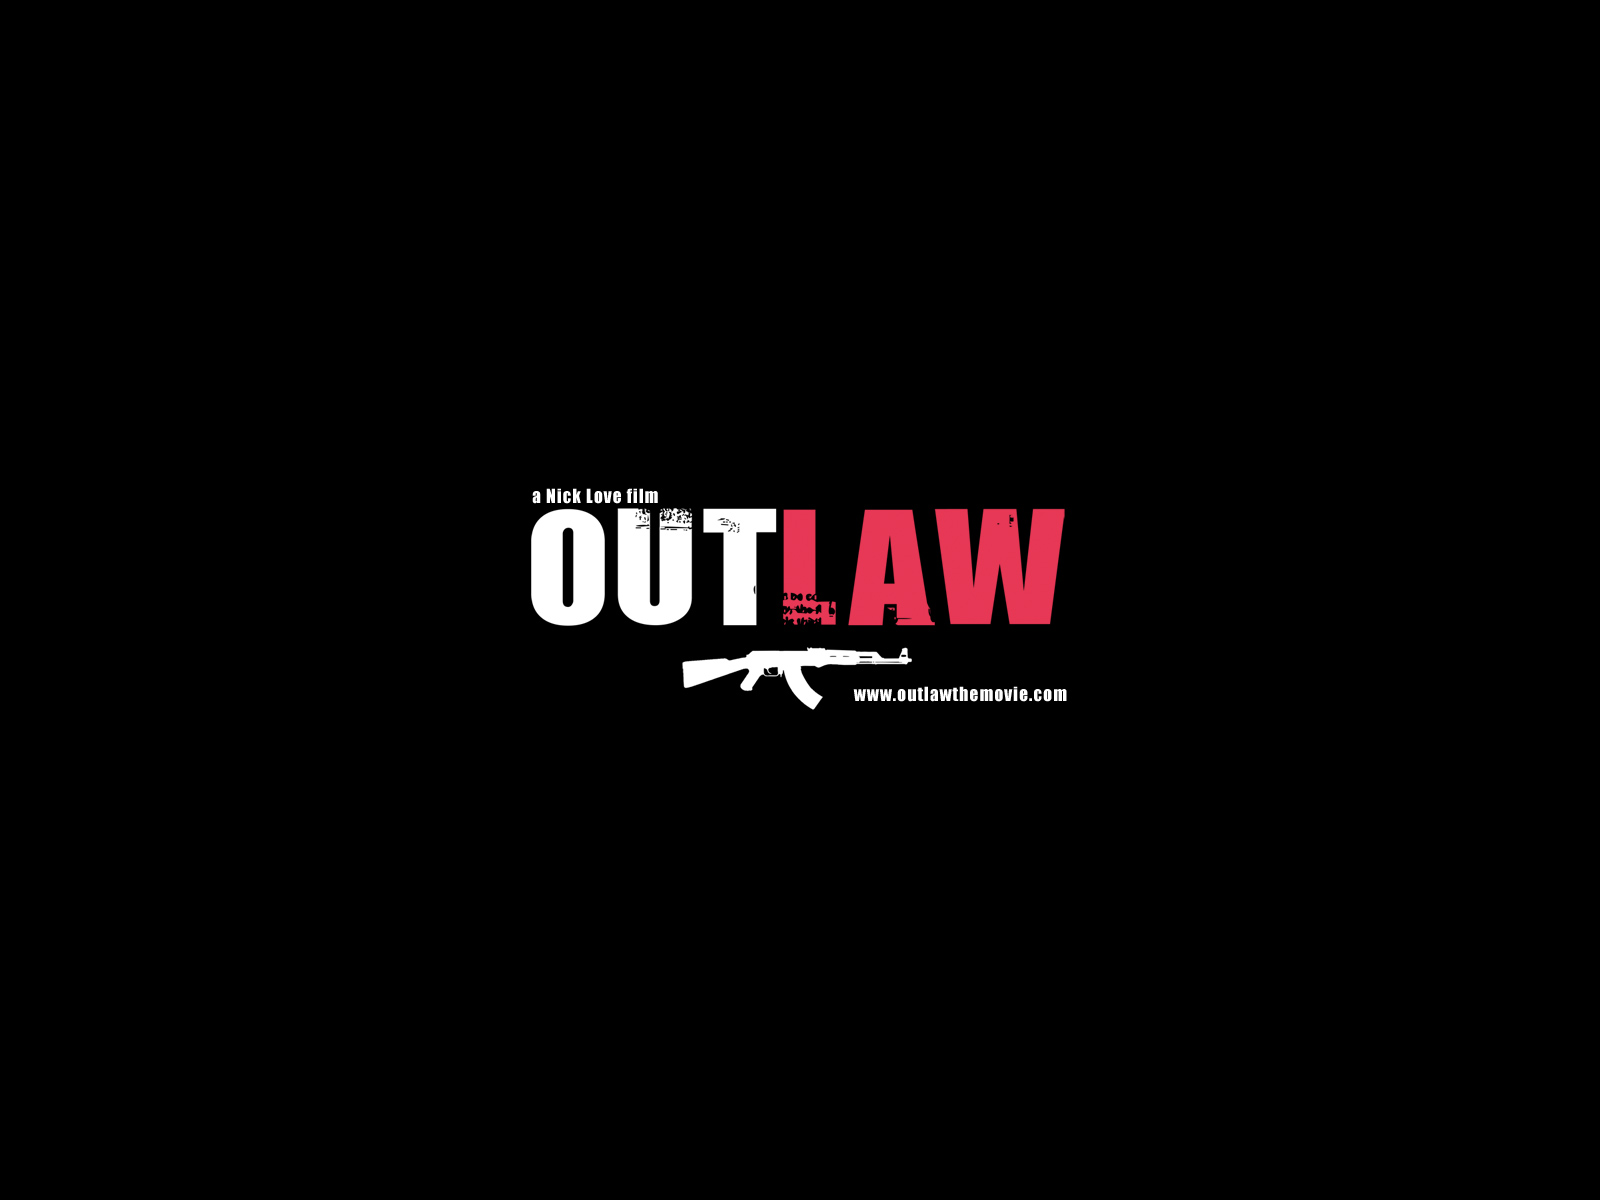 The Outlaw Desktop Wallpaper For HD Widescreen And Mobile